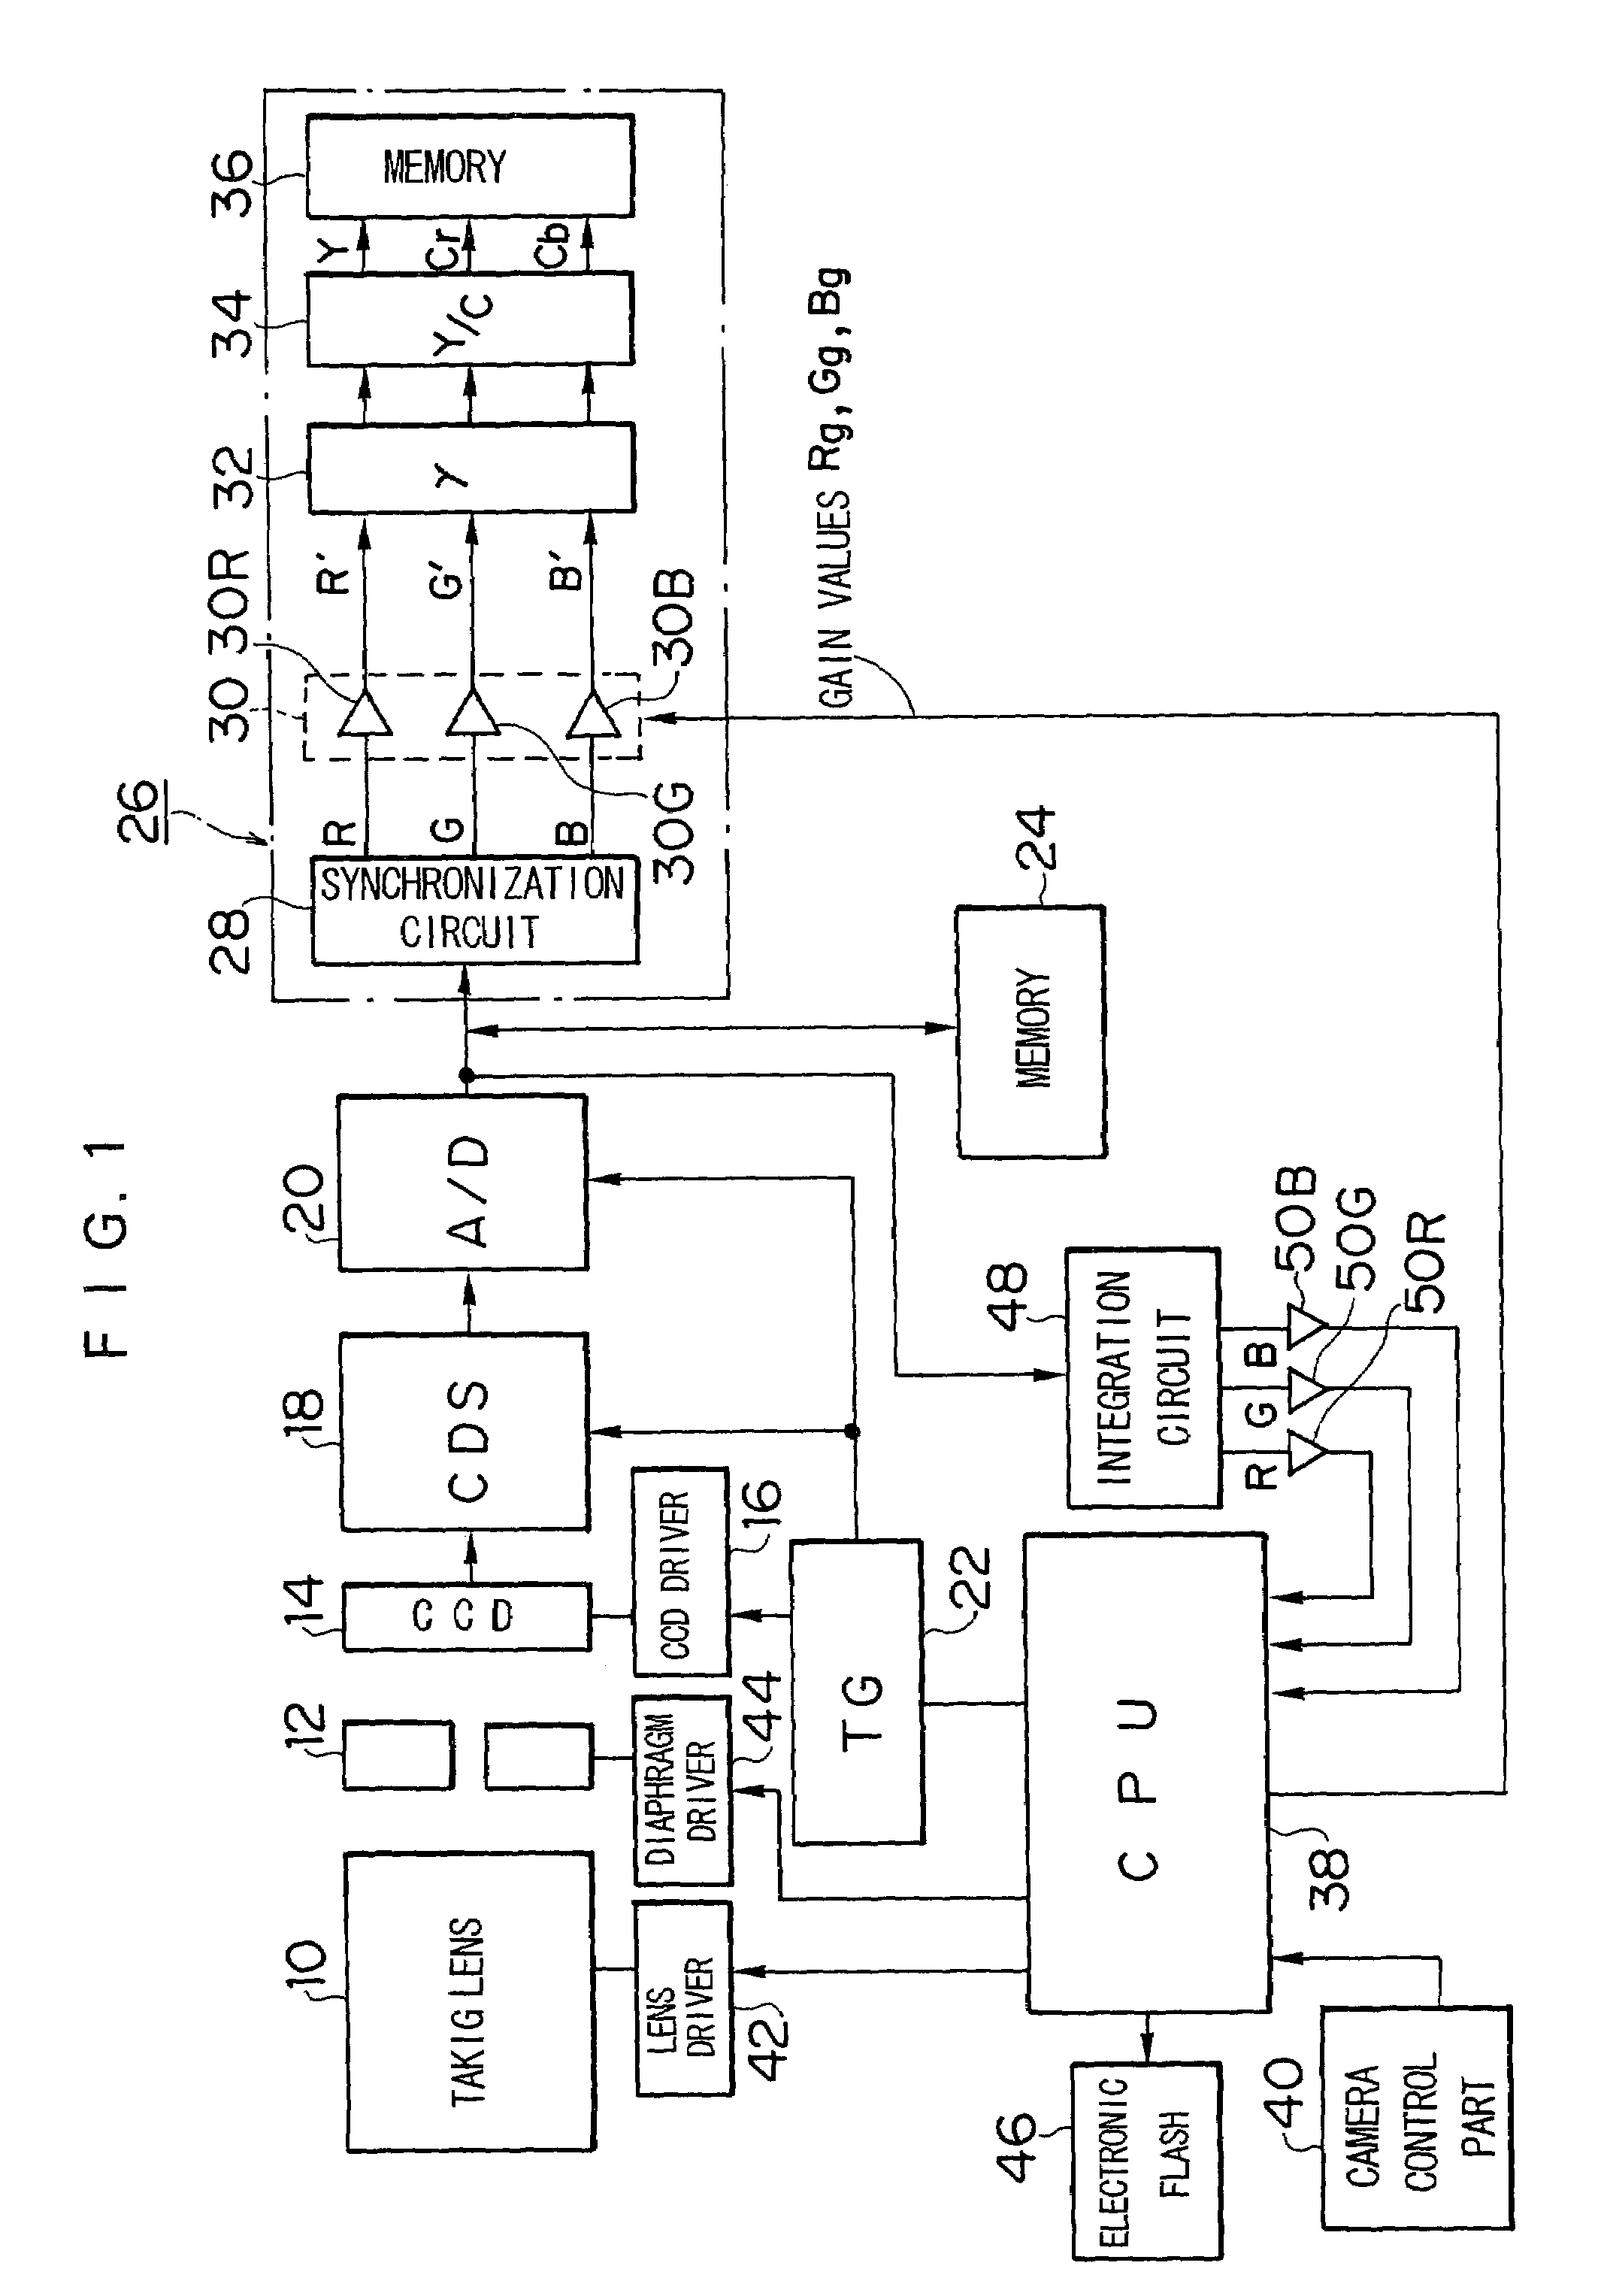 Method and apparatus for automatic white balance adjustment based upon light source type